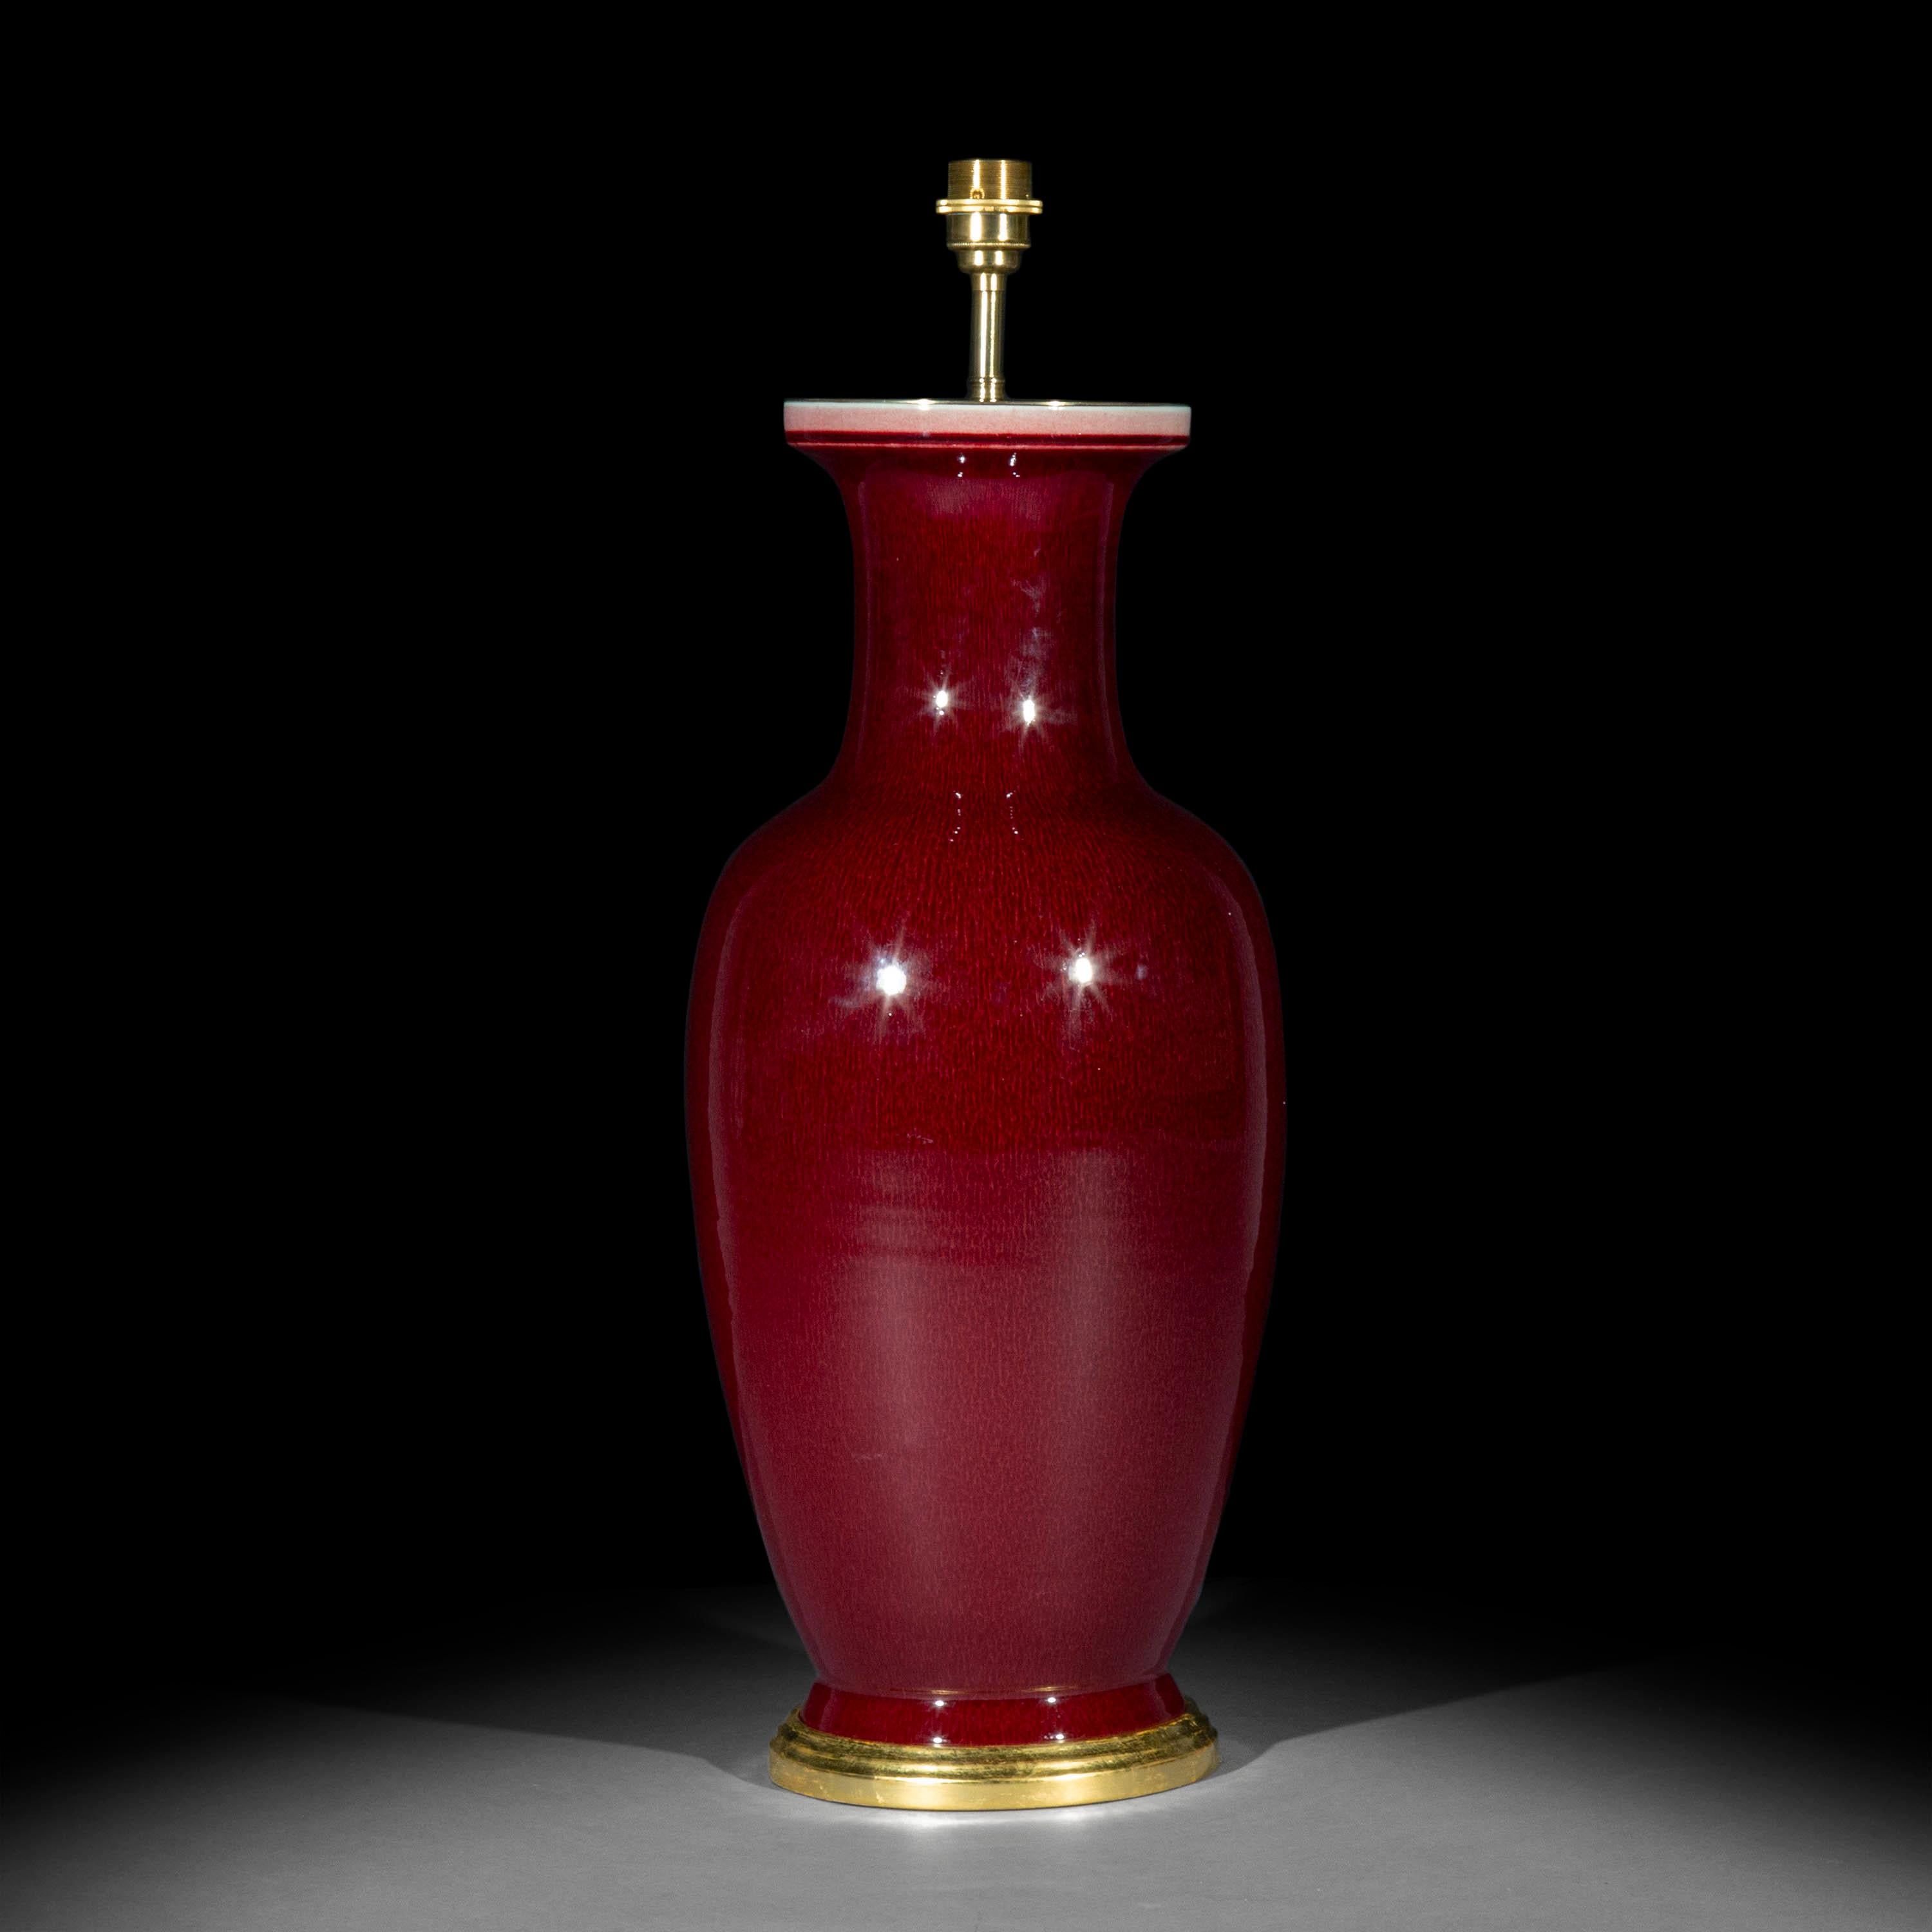 A stunning Chinese export Sang de Boeuf (Oxblood) glazed vase of superb quality, mounted as table lamp on a handmade water-gilded base.
20th century.

Why we like it
We love its impeccable shape and the massive scale of this vase which make it a